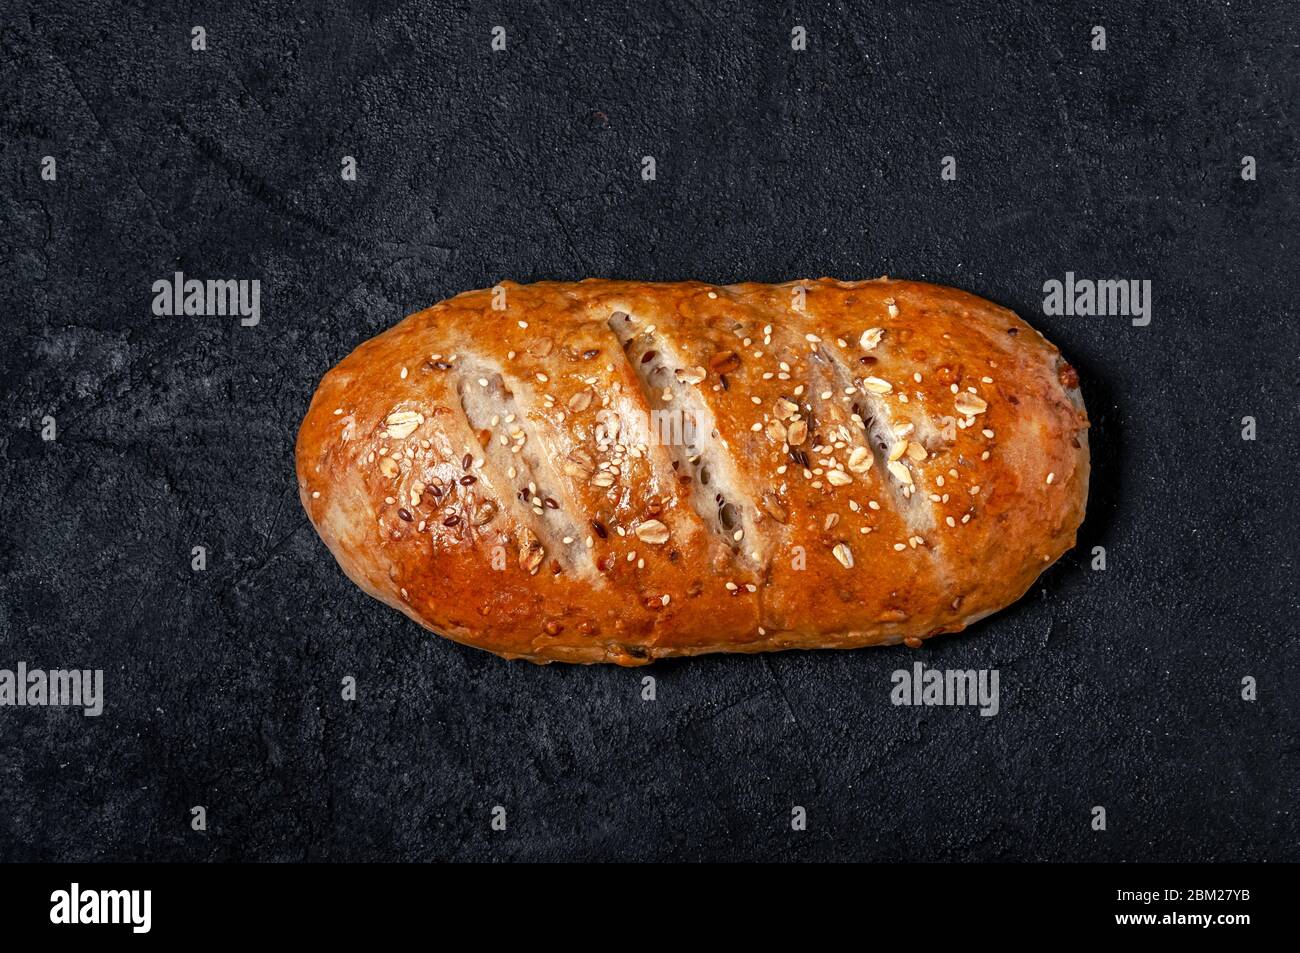 Homemade Wholemeal Multigrain Bread with Flax Seeds and Sesame on Dark Table. Top View Flat Lay. Copy Space Stock Photo